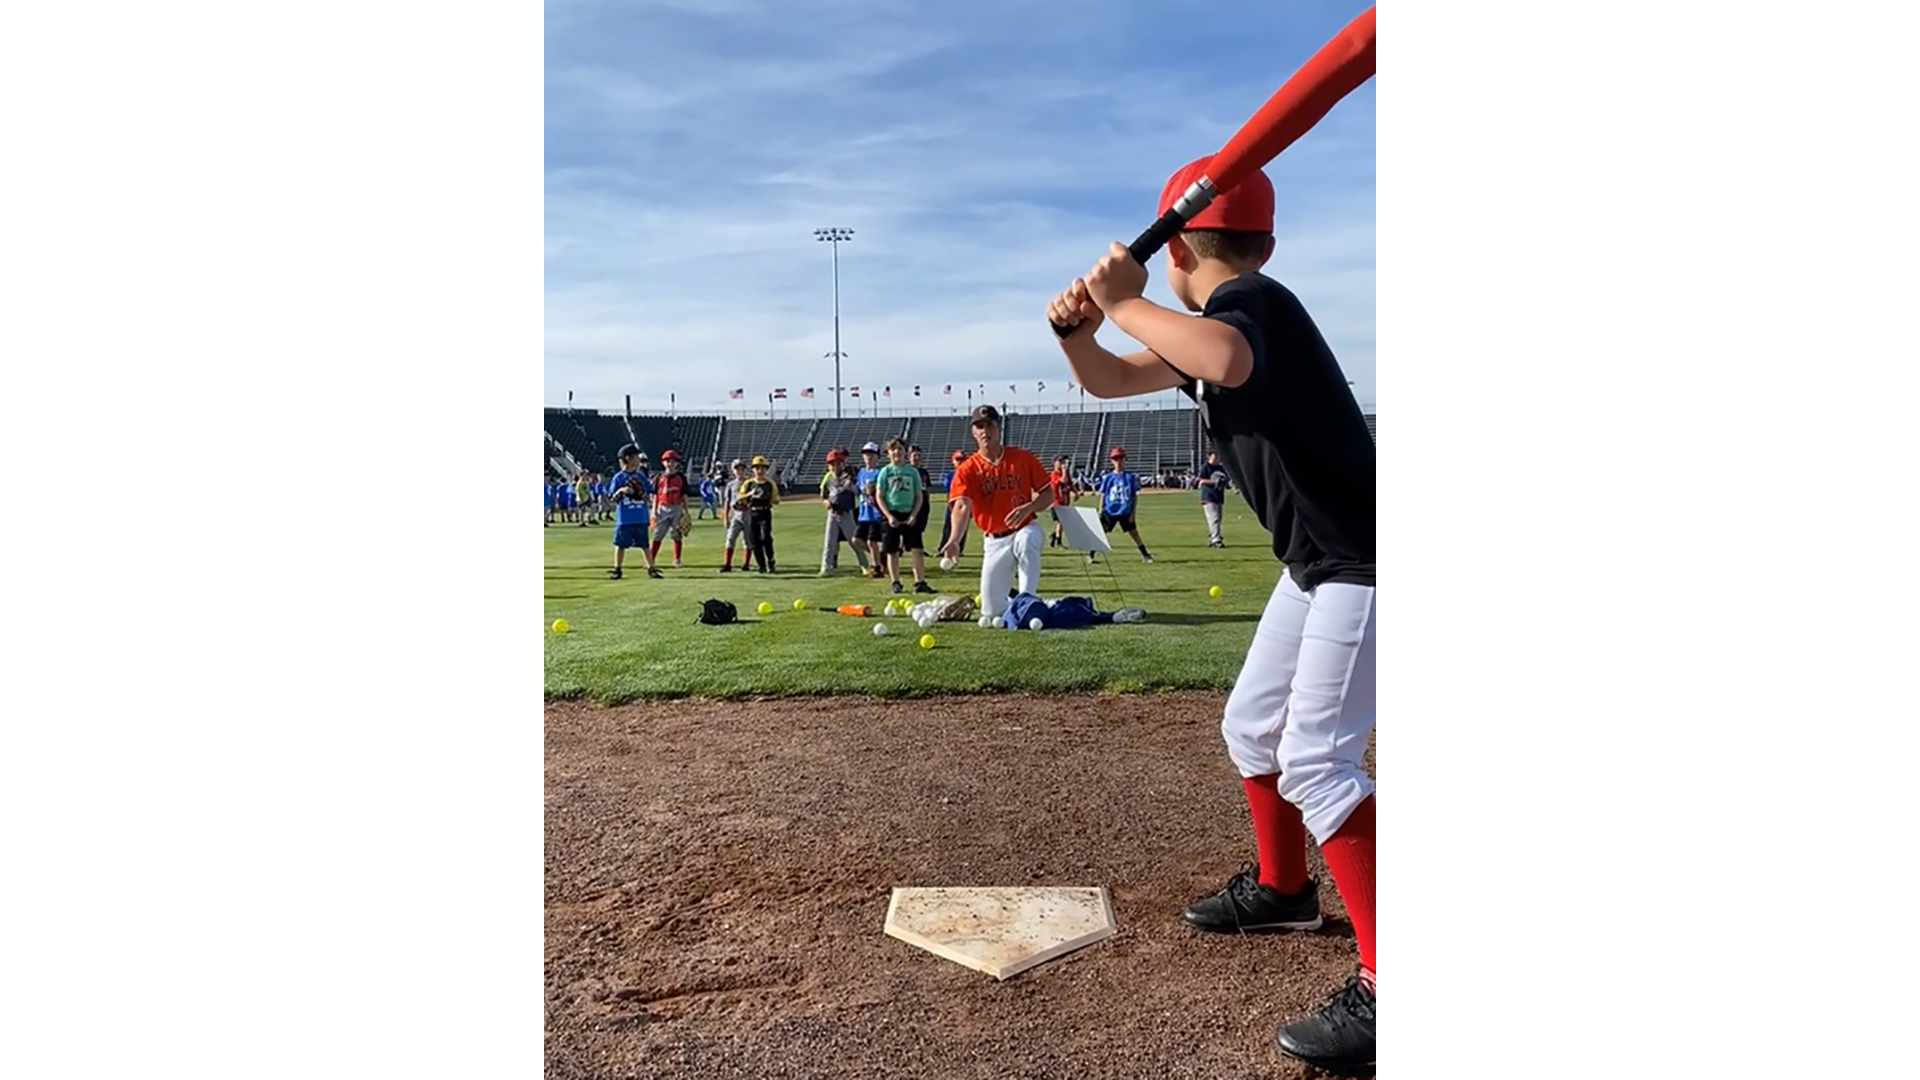 Tiger baseball team assists with Challenger Games-MLB Play Ball event